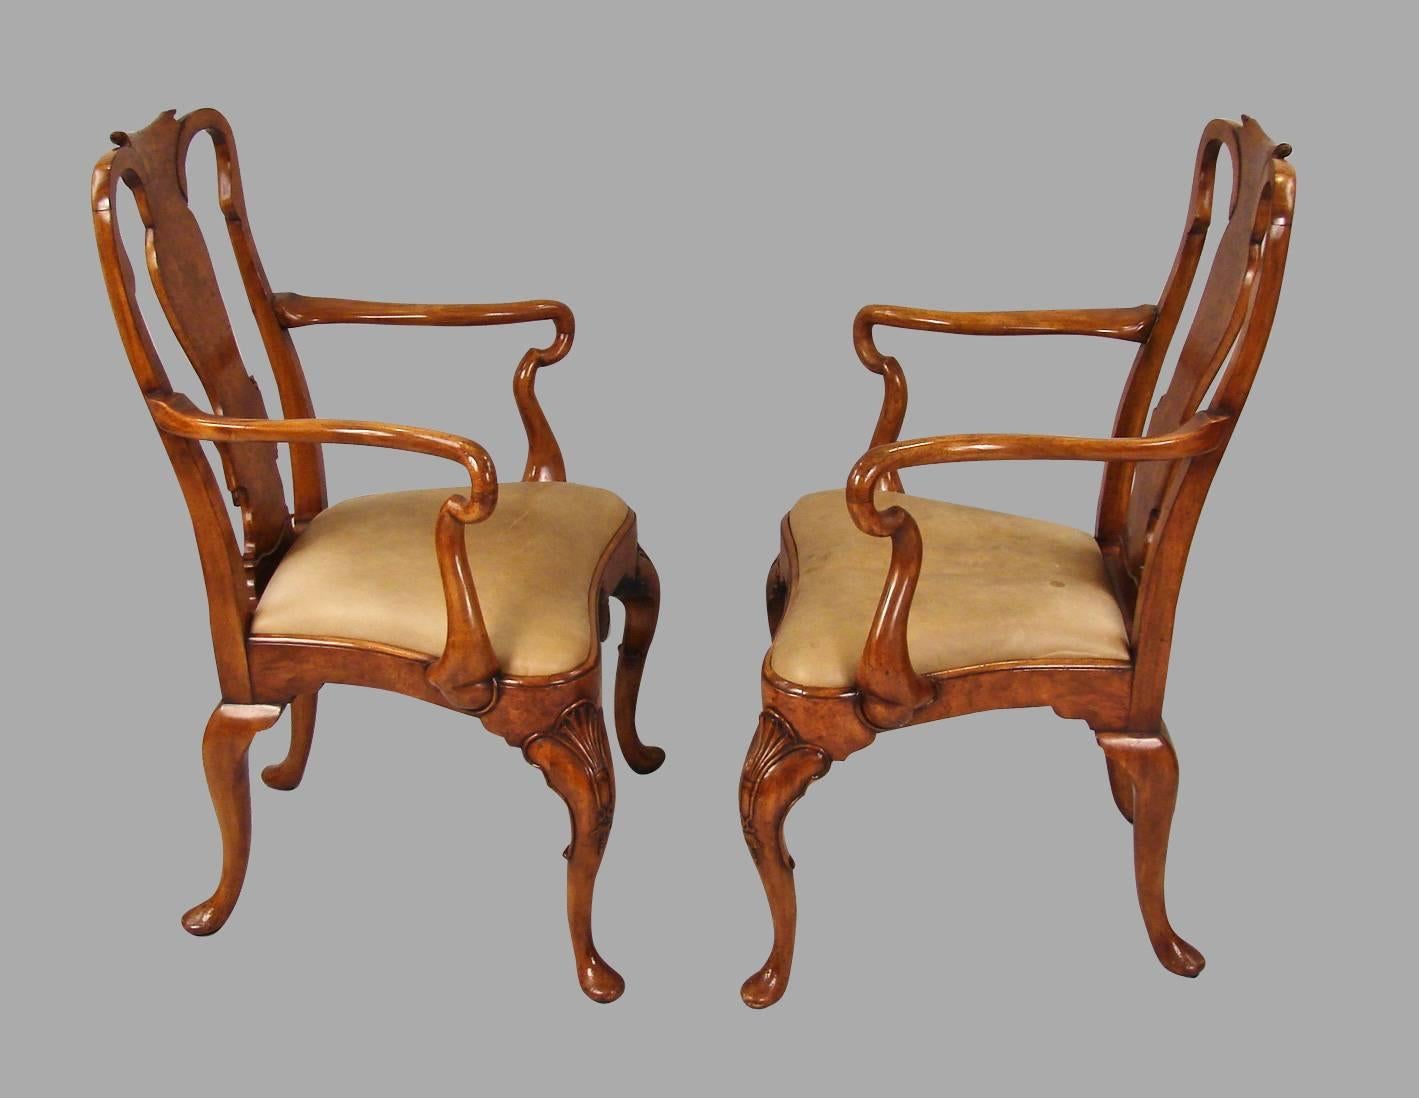 An attractive and substantial set of 12 English Georgian style walnut and burl walnut veneered dining chairs consisting of 10 sides and two-arm chairs, each with a carved burled walnut splat, the drop-in balloon seats upholstered in brown hide,